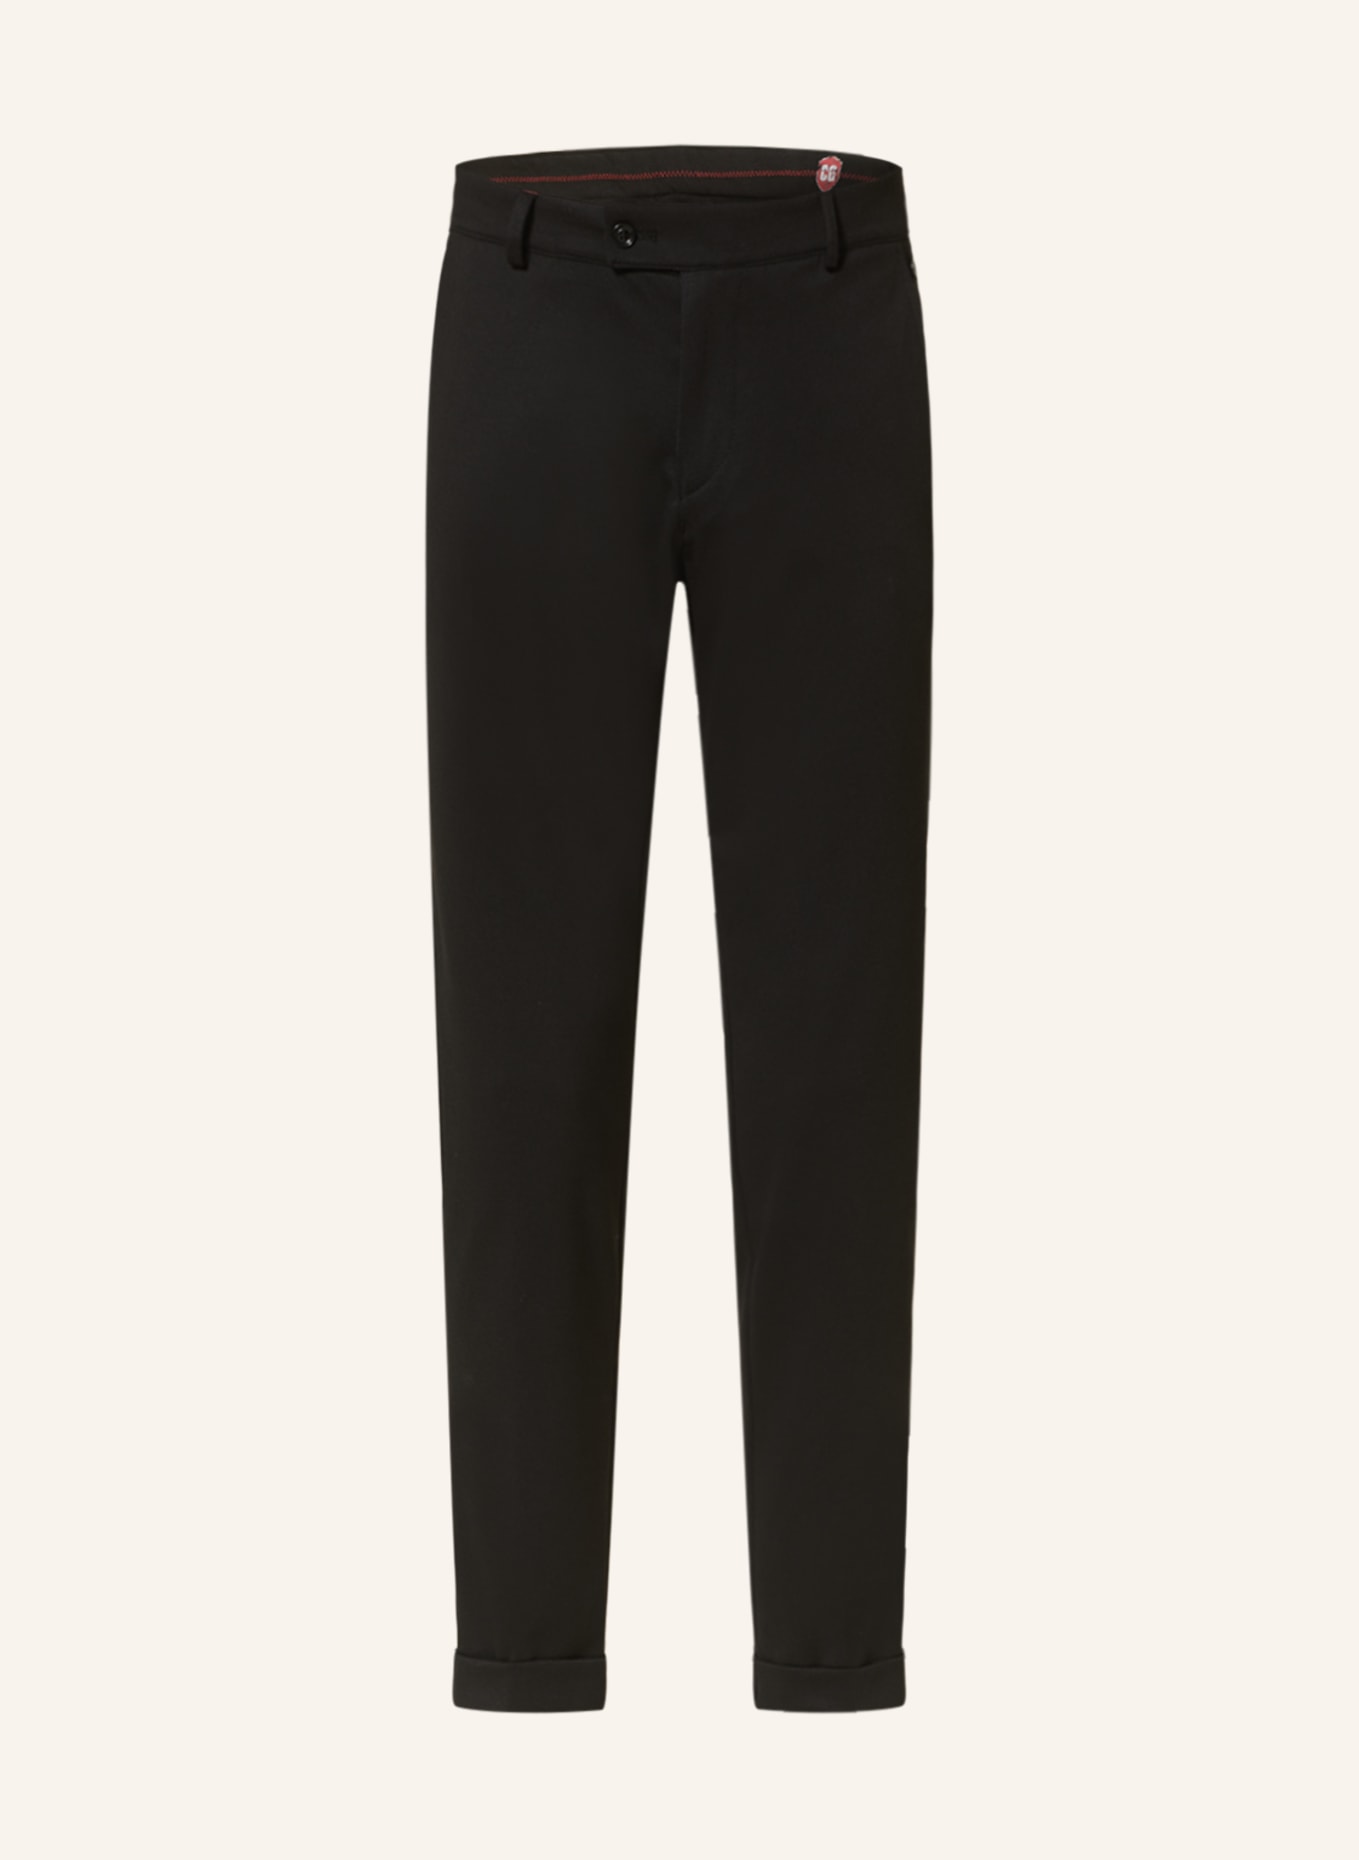 CG - CLUB of GENTS Suit trousers slim fit in jersey, Color: 90 SCHWARZ (Image 1)